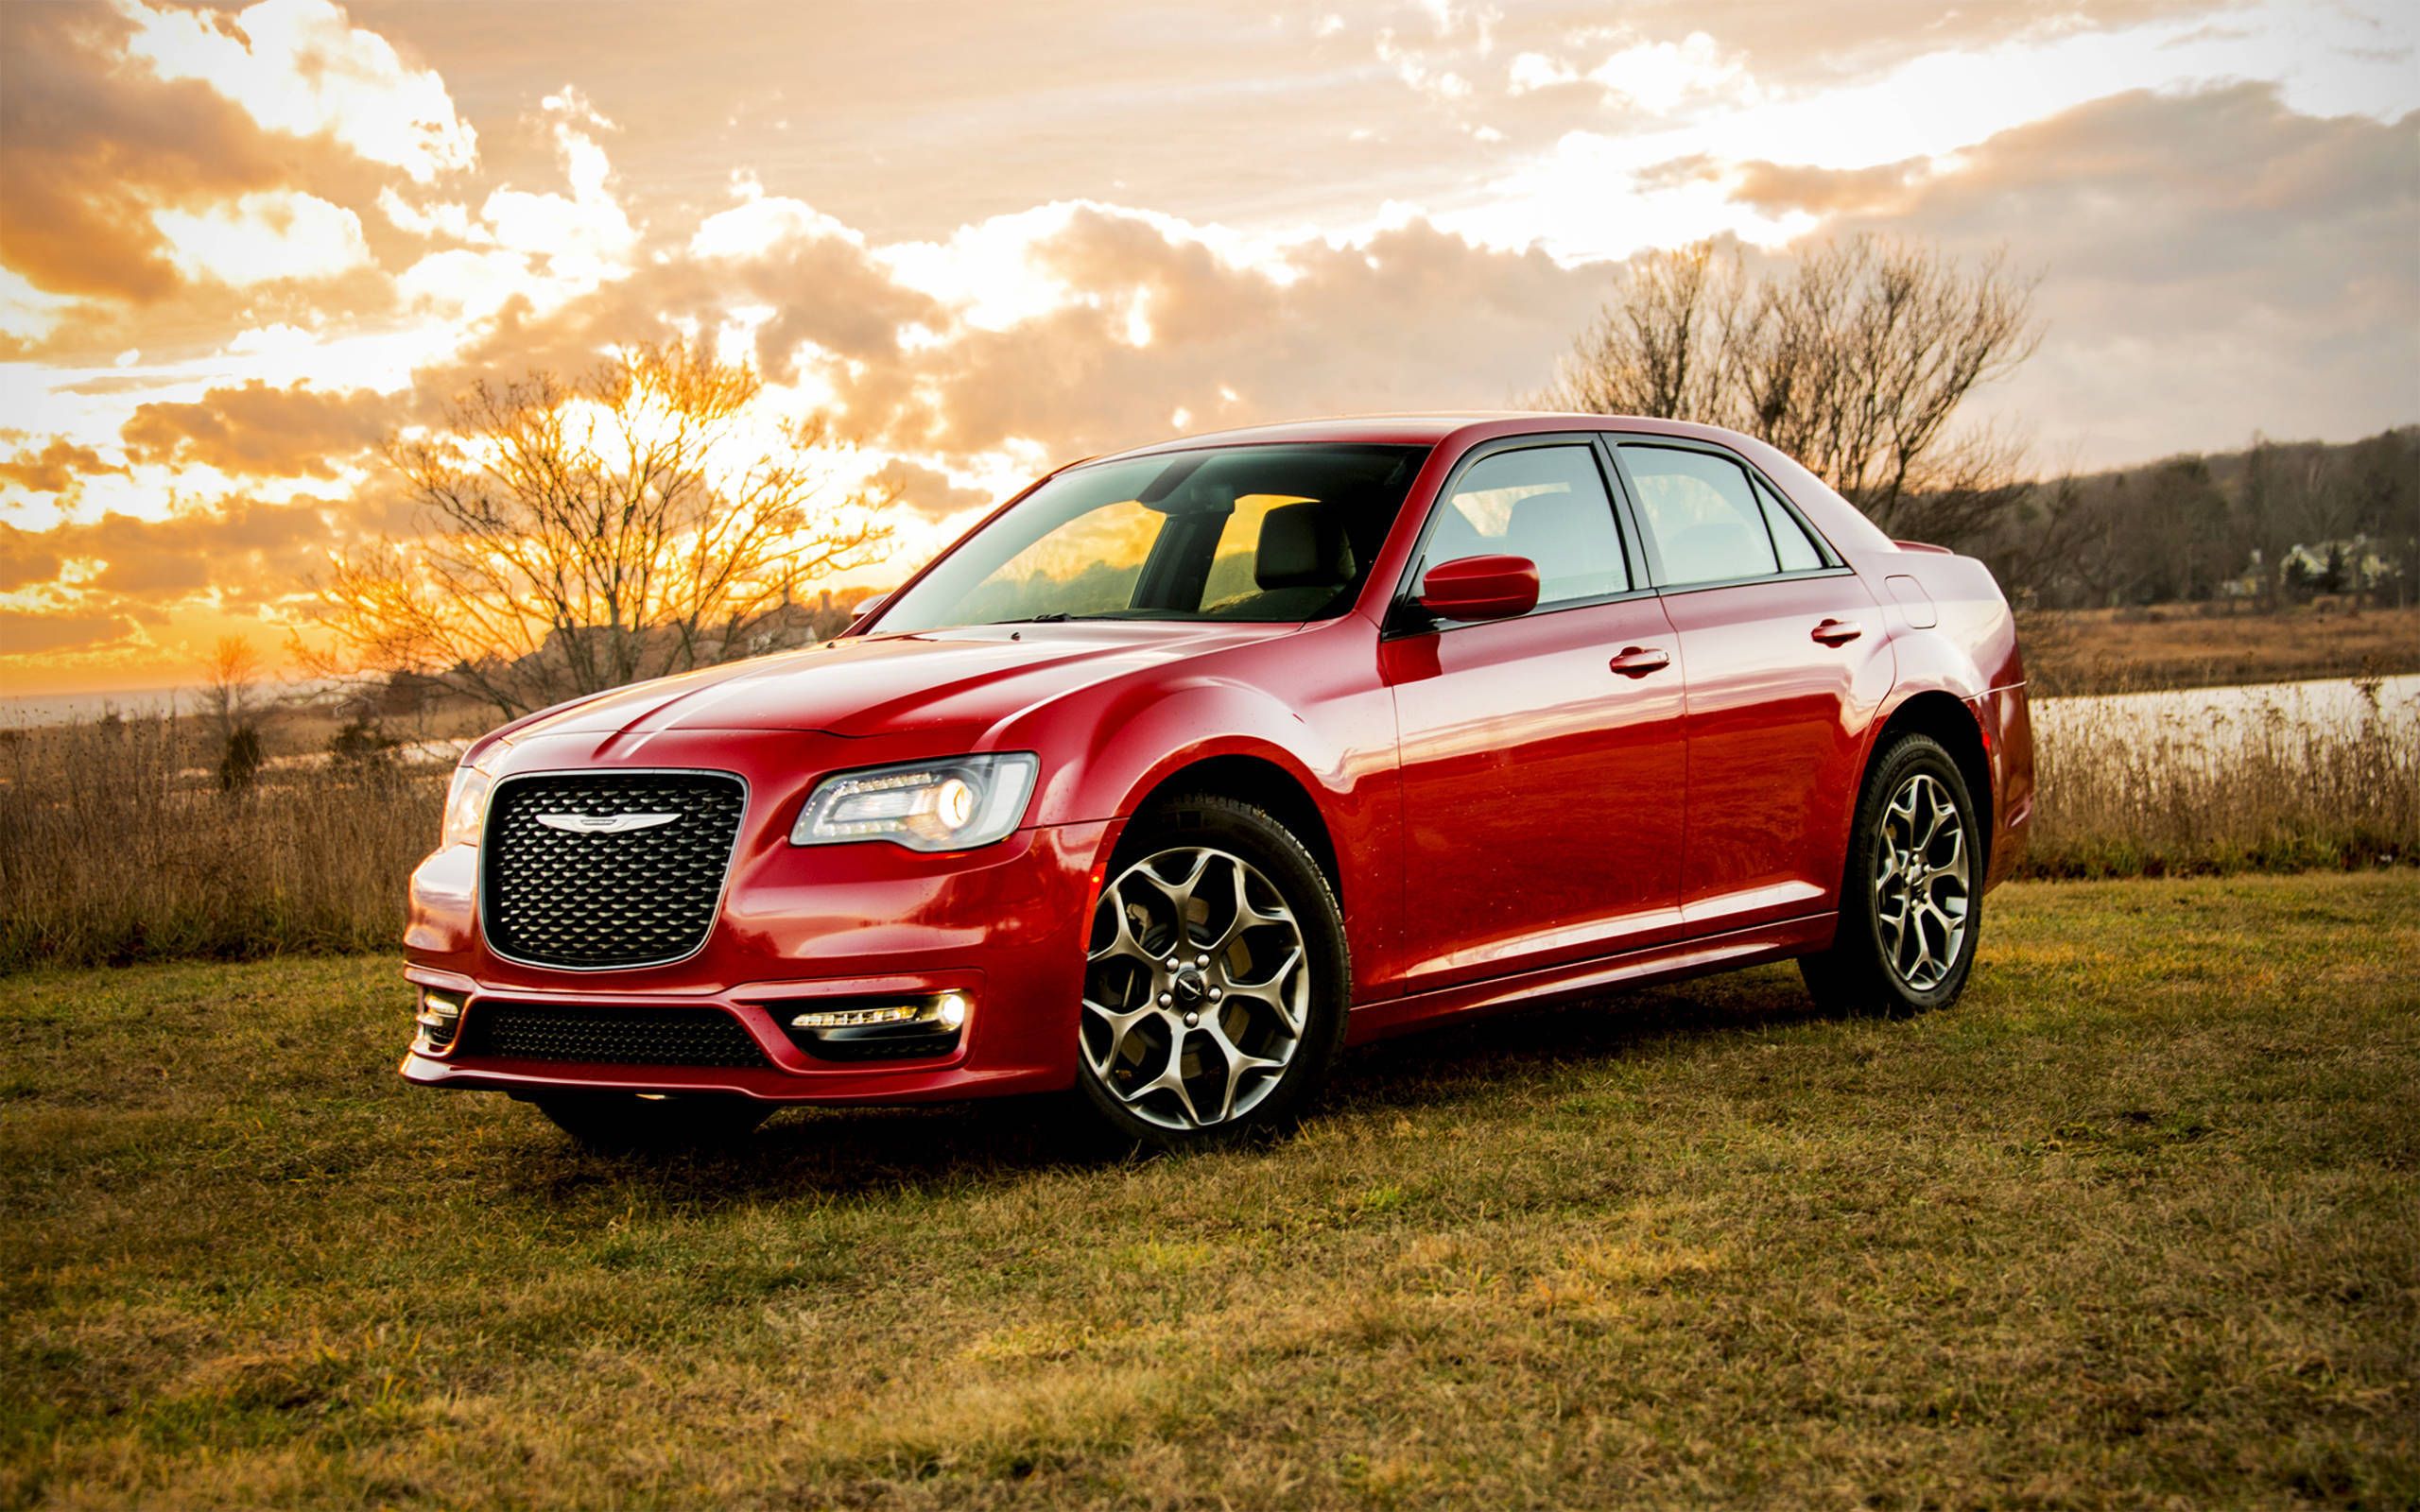 2017 Chrysler 300S review: Old Ironsides is still a bargain Benz